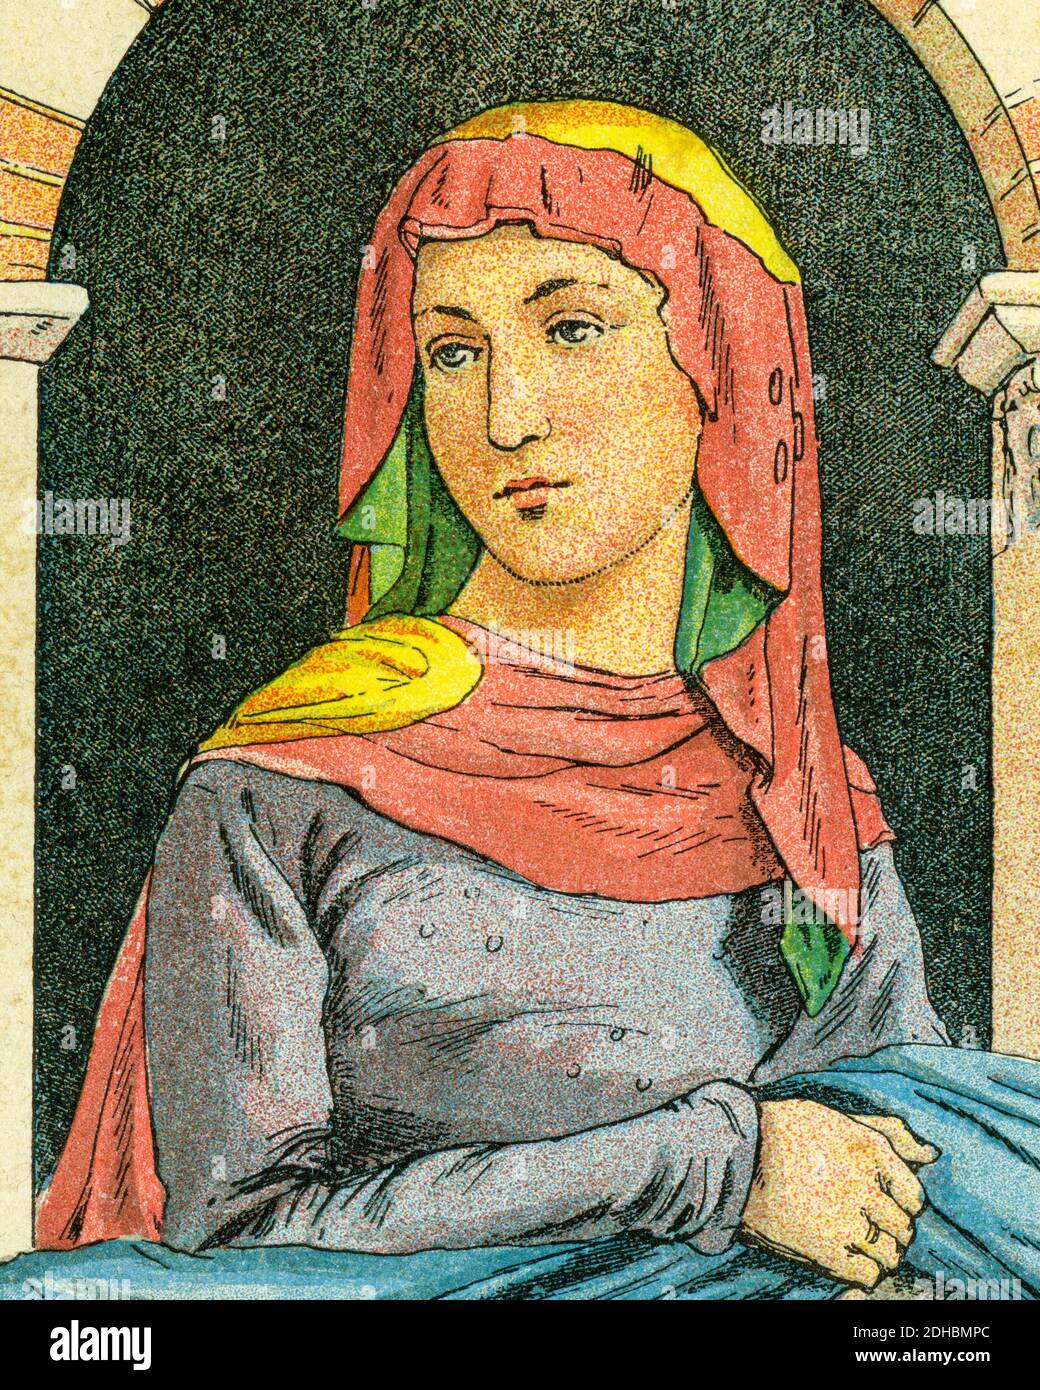 Old color lithography portrait of Radegund (520-587) Thuringian princess and Frankish queen, who founded the Abbey of the Holy Cross at Poitiers. Patron saint of several churches in France and England and of Jesus College in Cambridge. France. Les Français Illustres by Gustave Demoulin 1897 Stock Photo